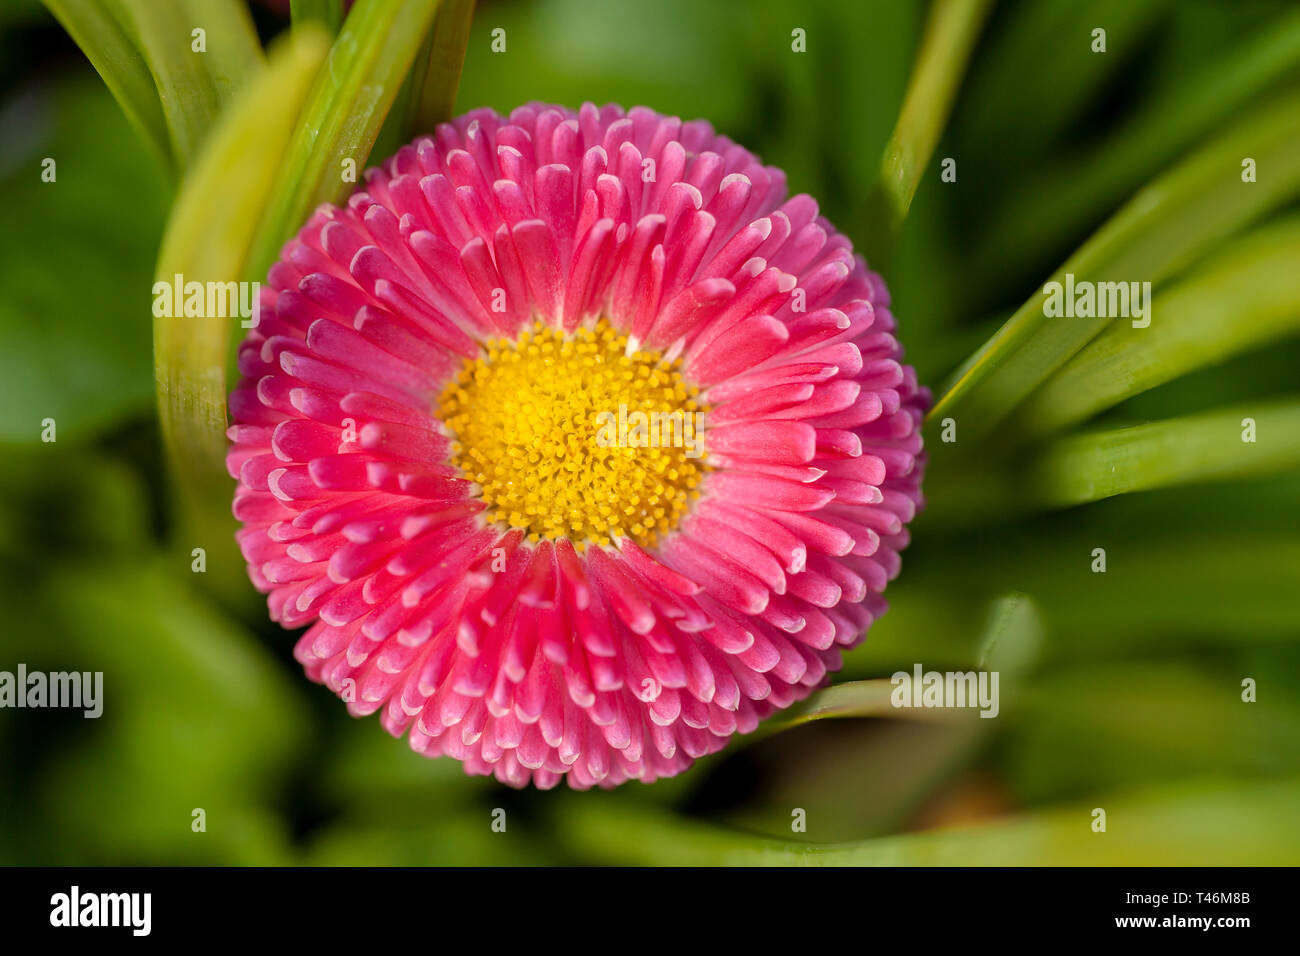 Macro flower head of a pink Bellis perensis daisy with a yellow center. High detail close up garden image in spring time Stock Photo